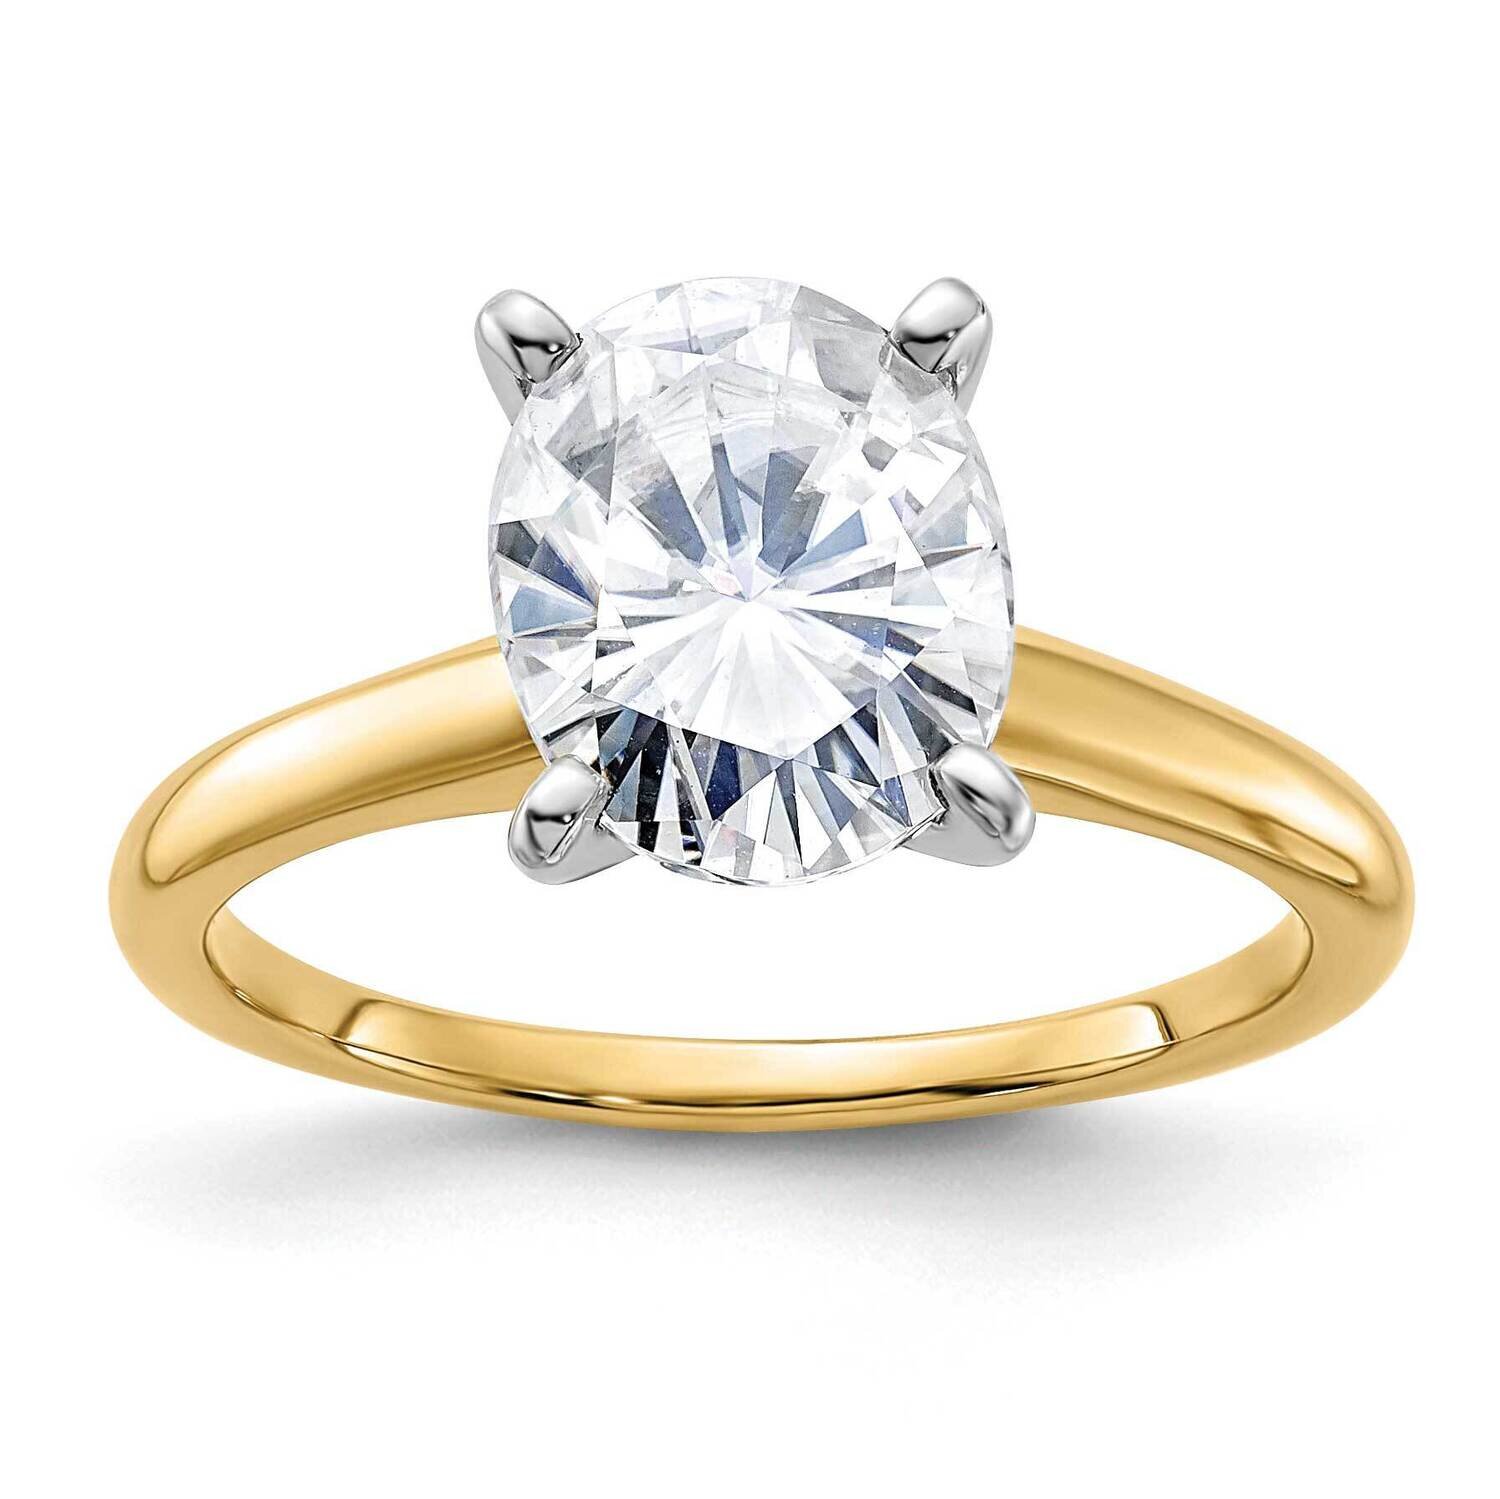 3ct. G H I True Light Oval Moissanite Solitaire Ring 14k Two Tone Gold RM5965O-300-8MT